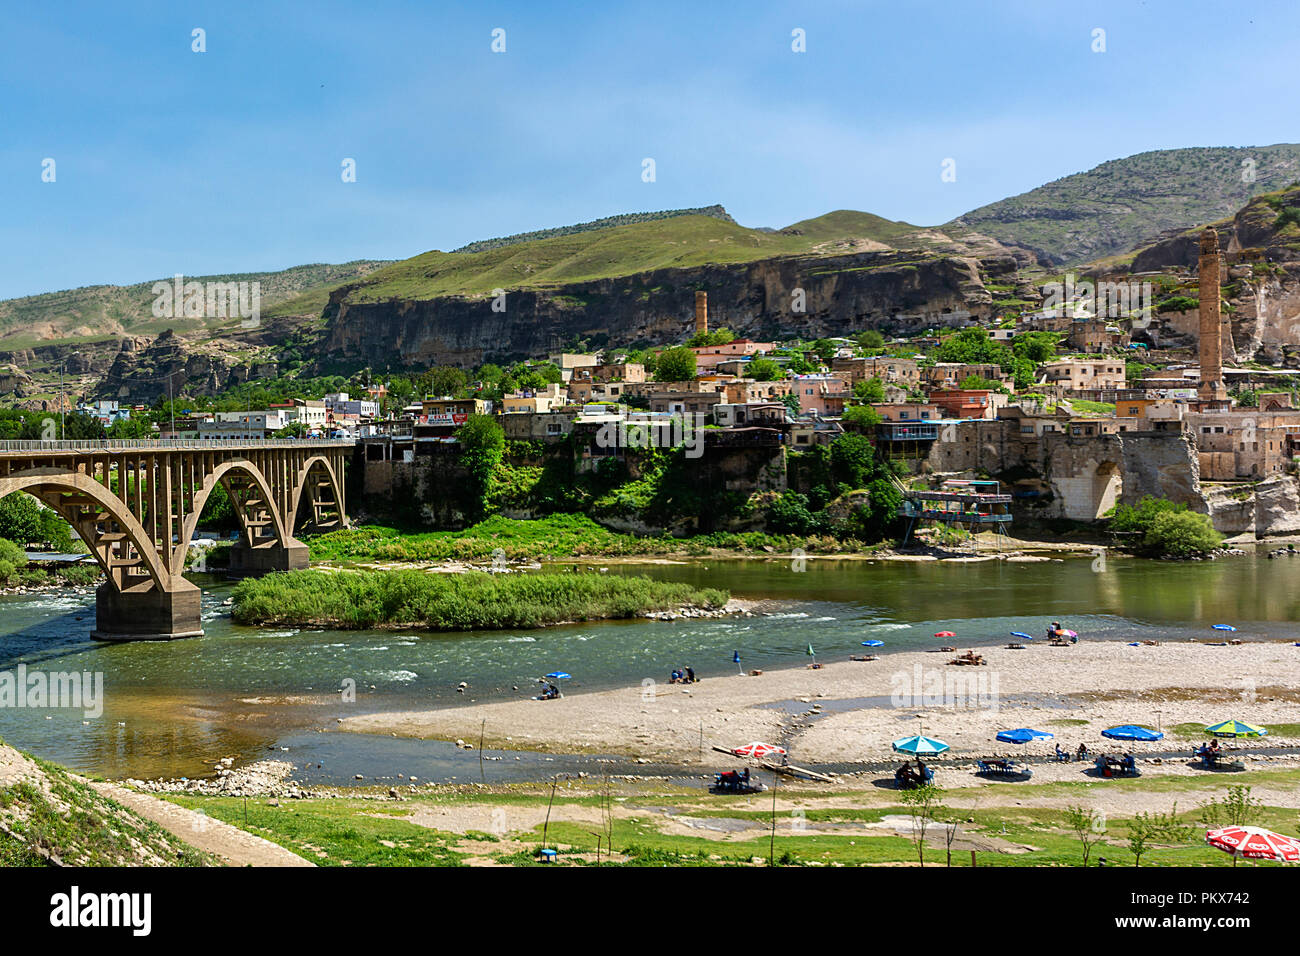 Twelve Thousand Years of Dillere Destan Beautifulness and History Veda to Hasankeyf Stock Photo